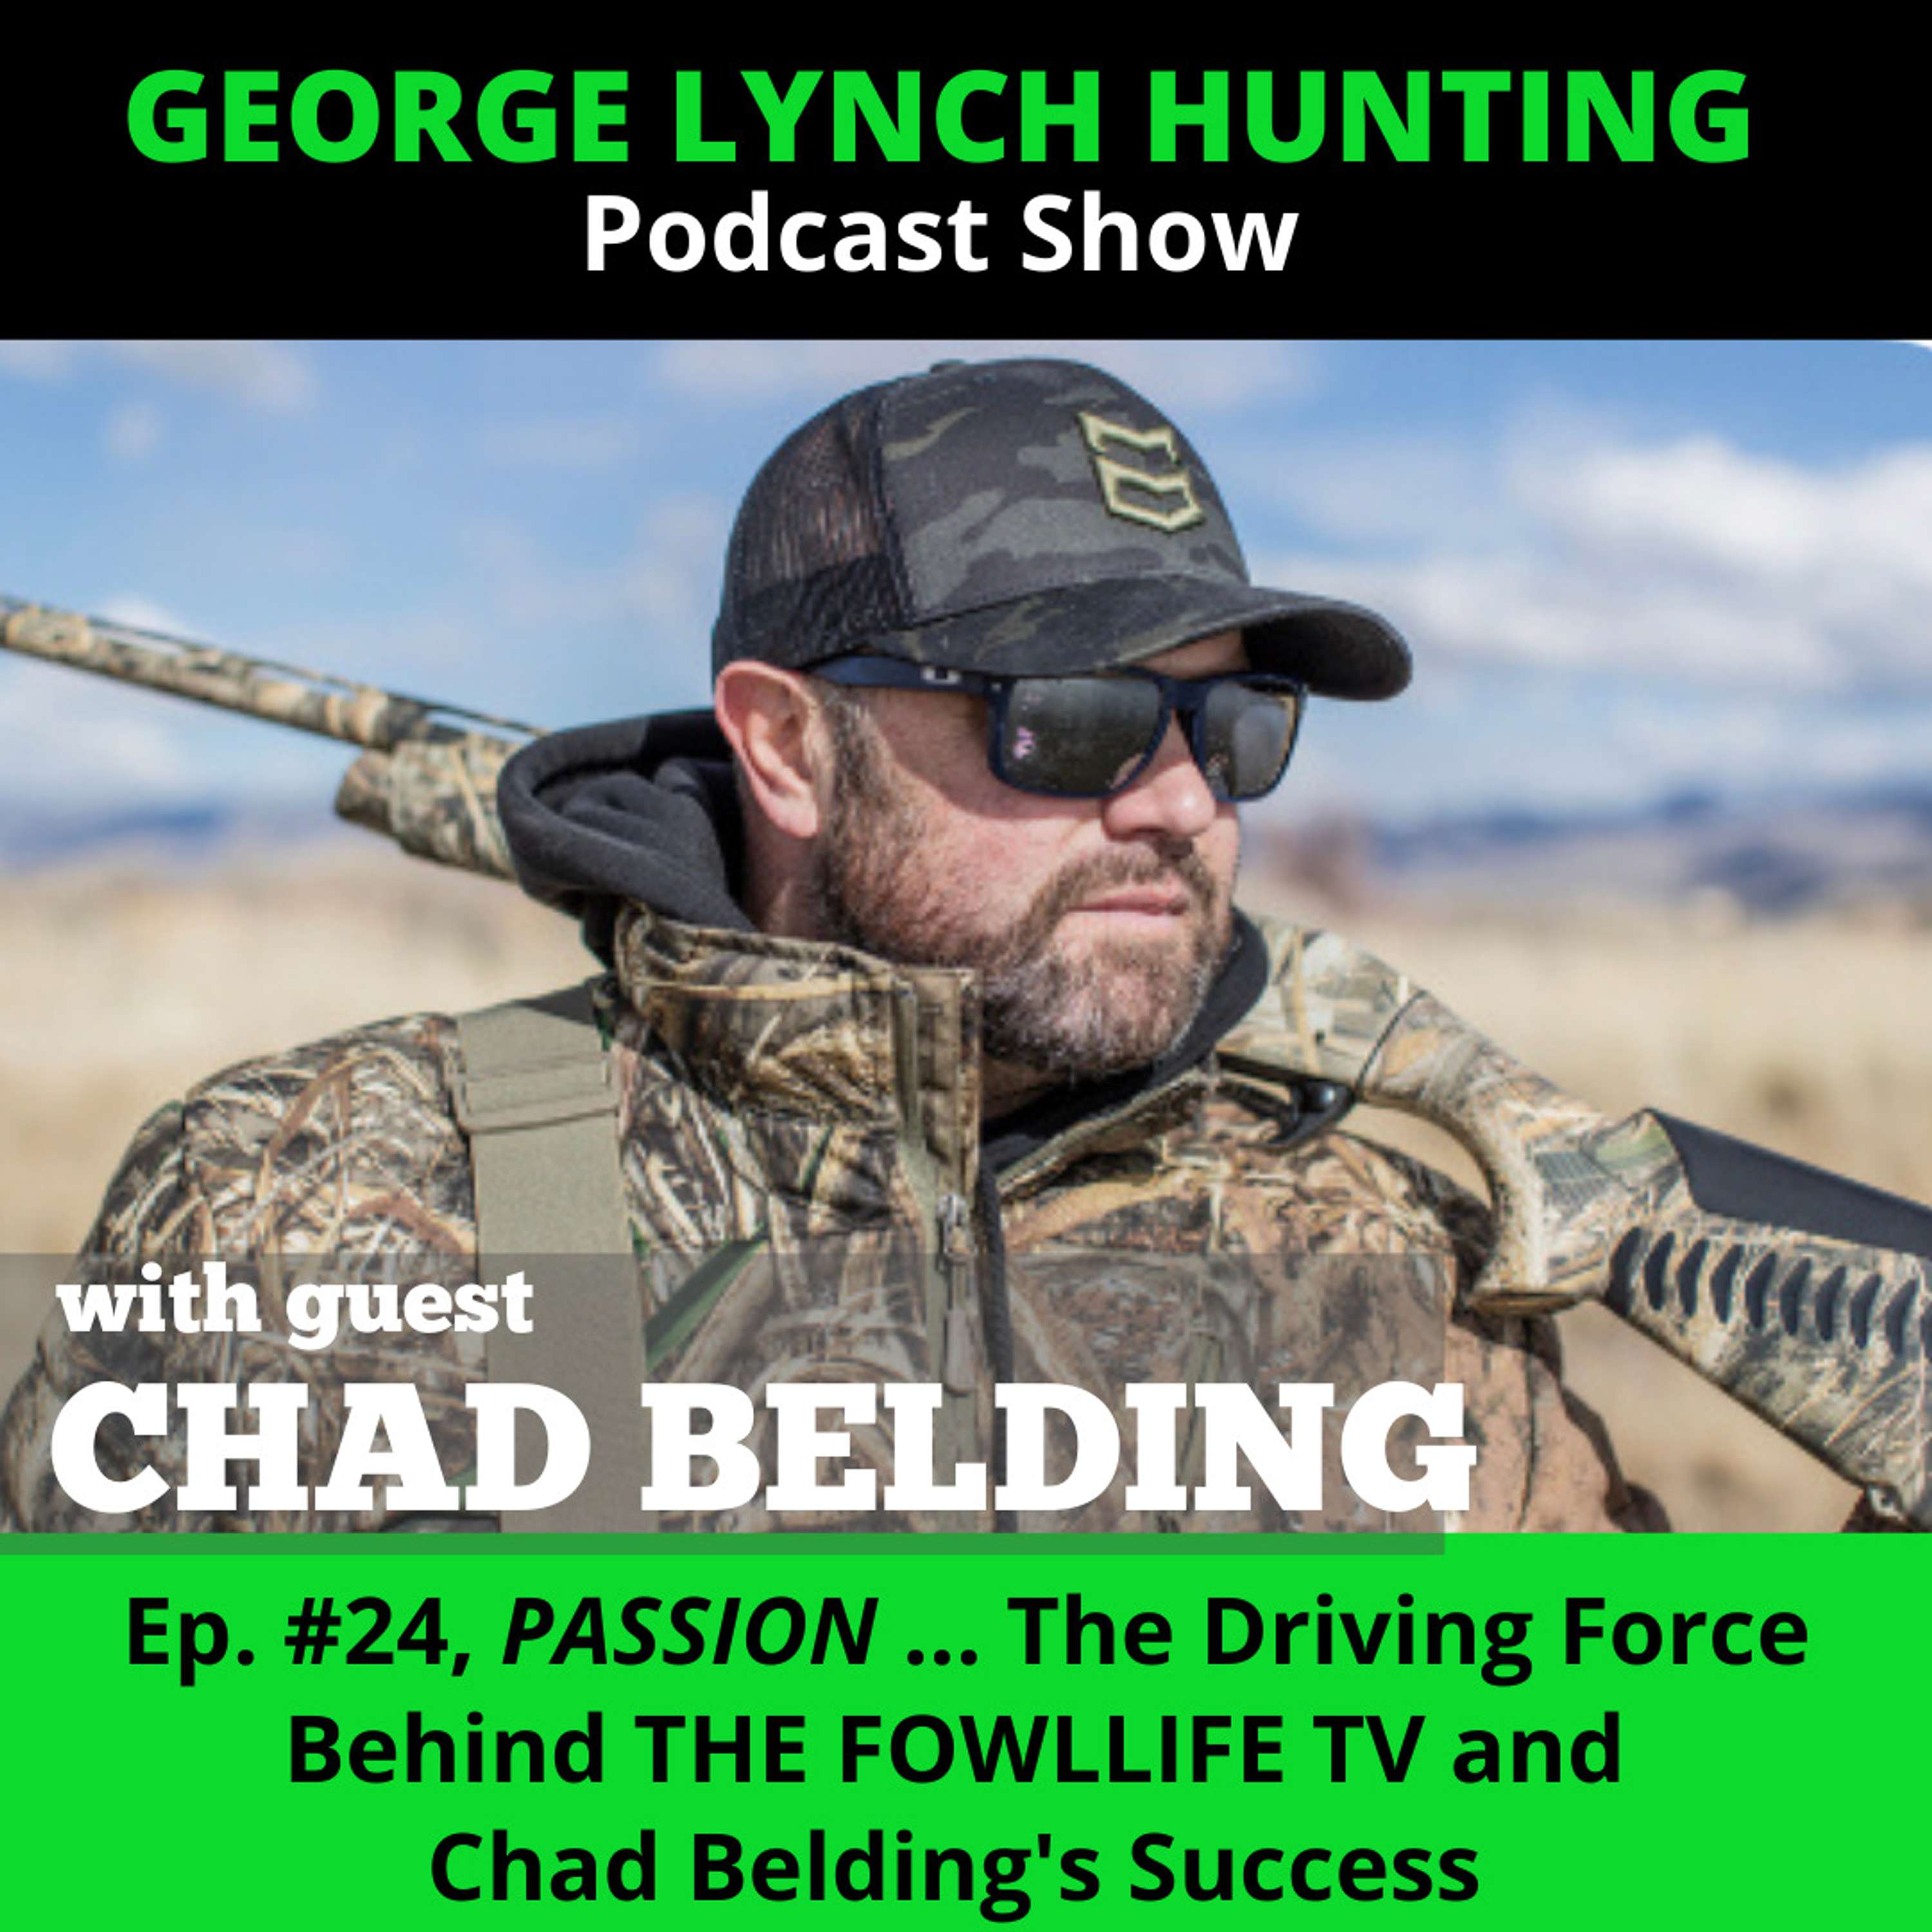 PASSION - The Driving Force behind THE FOWLLIFE TV and CHAD BELDING'S Success